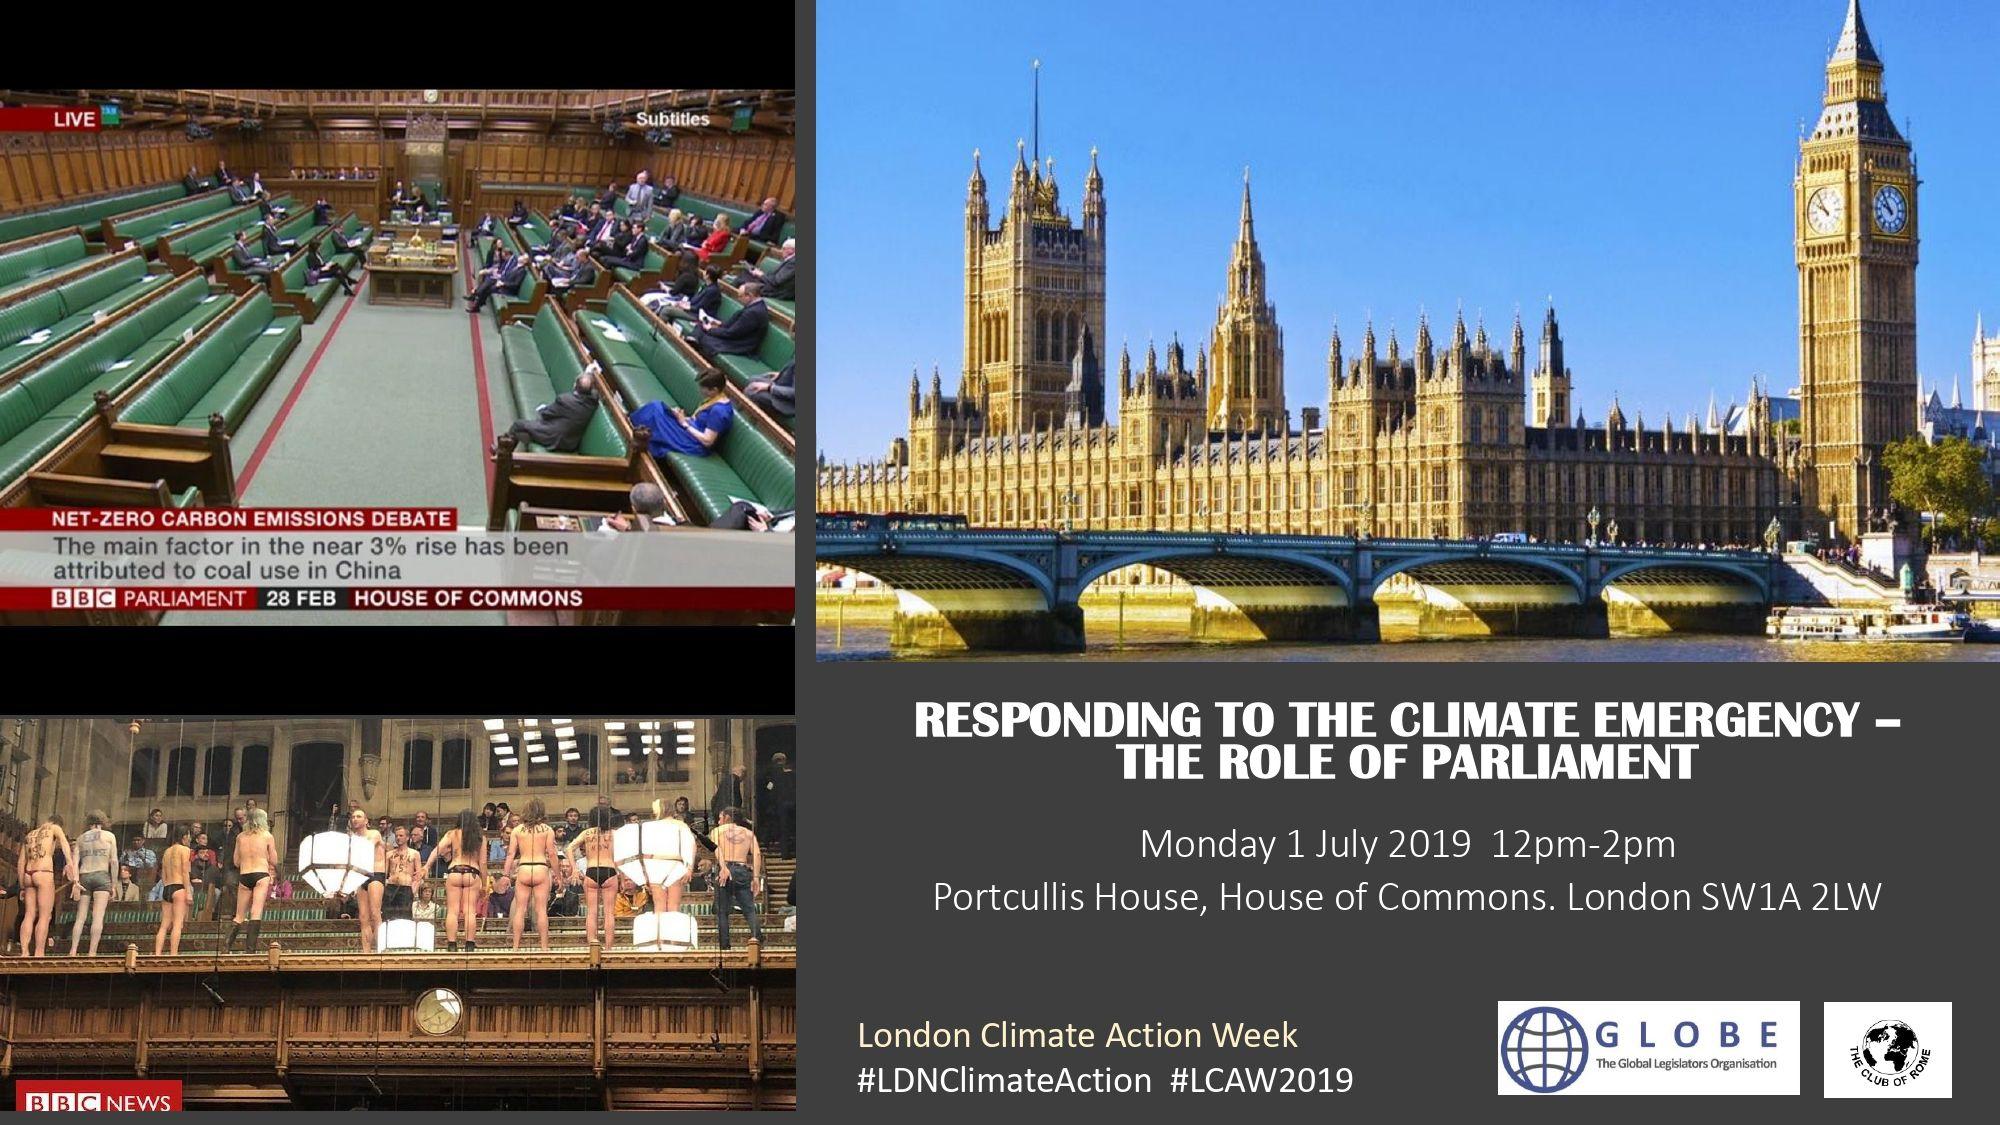 Responding to the Climate Emergency